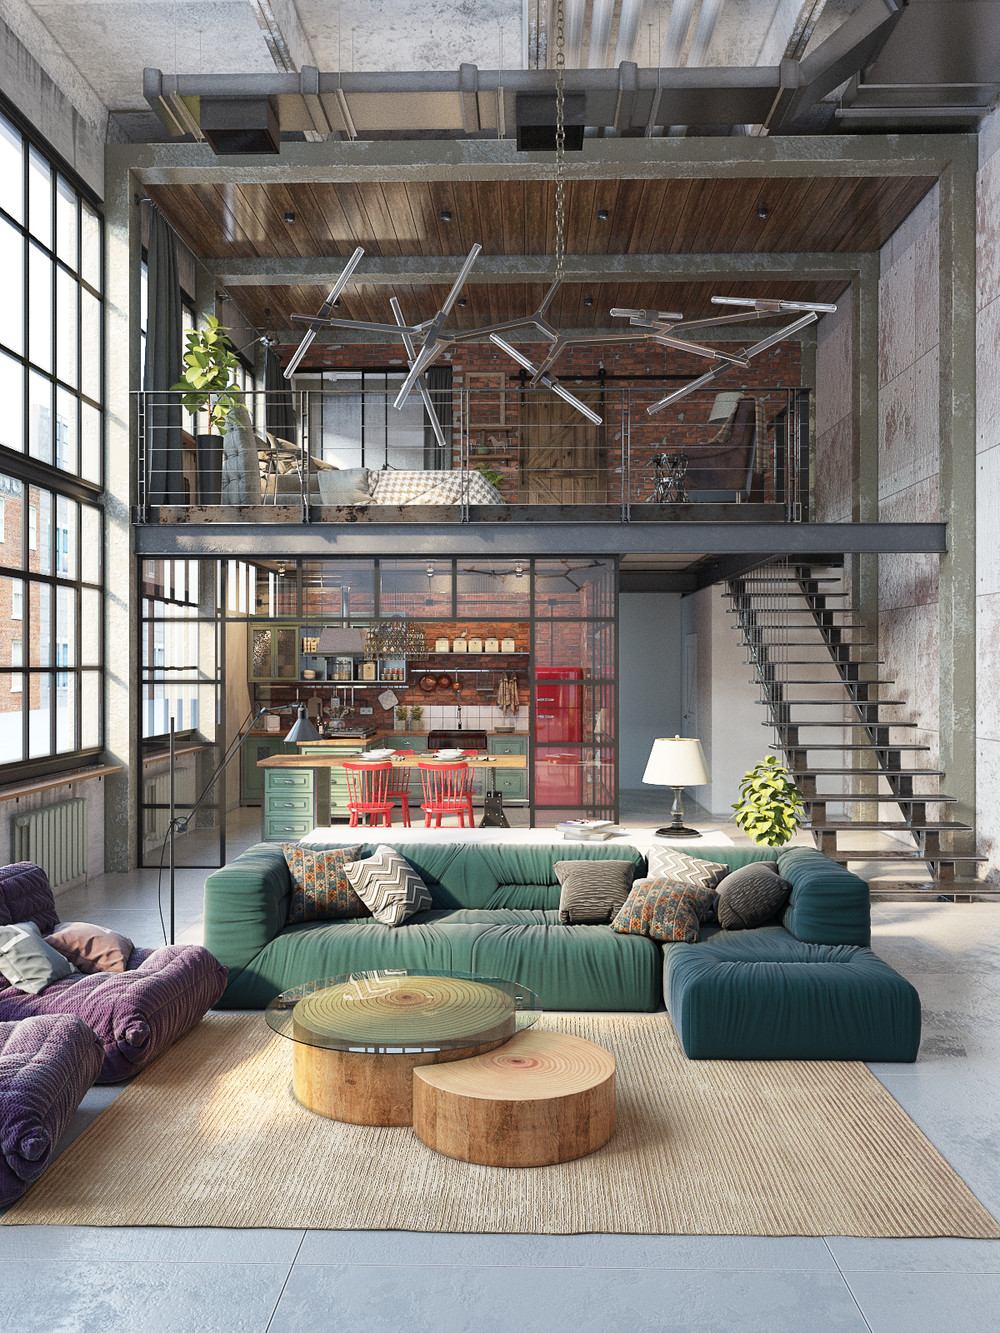 Industrial Loft Design With An Intriguing Color Palette